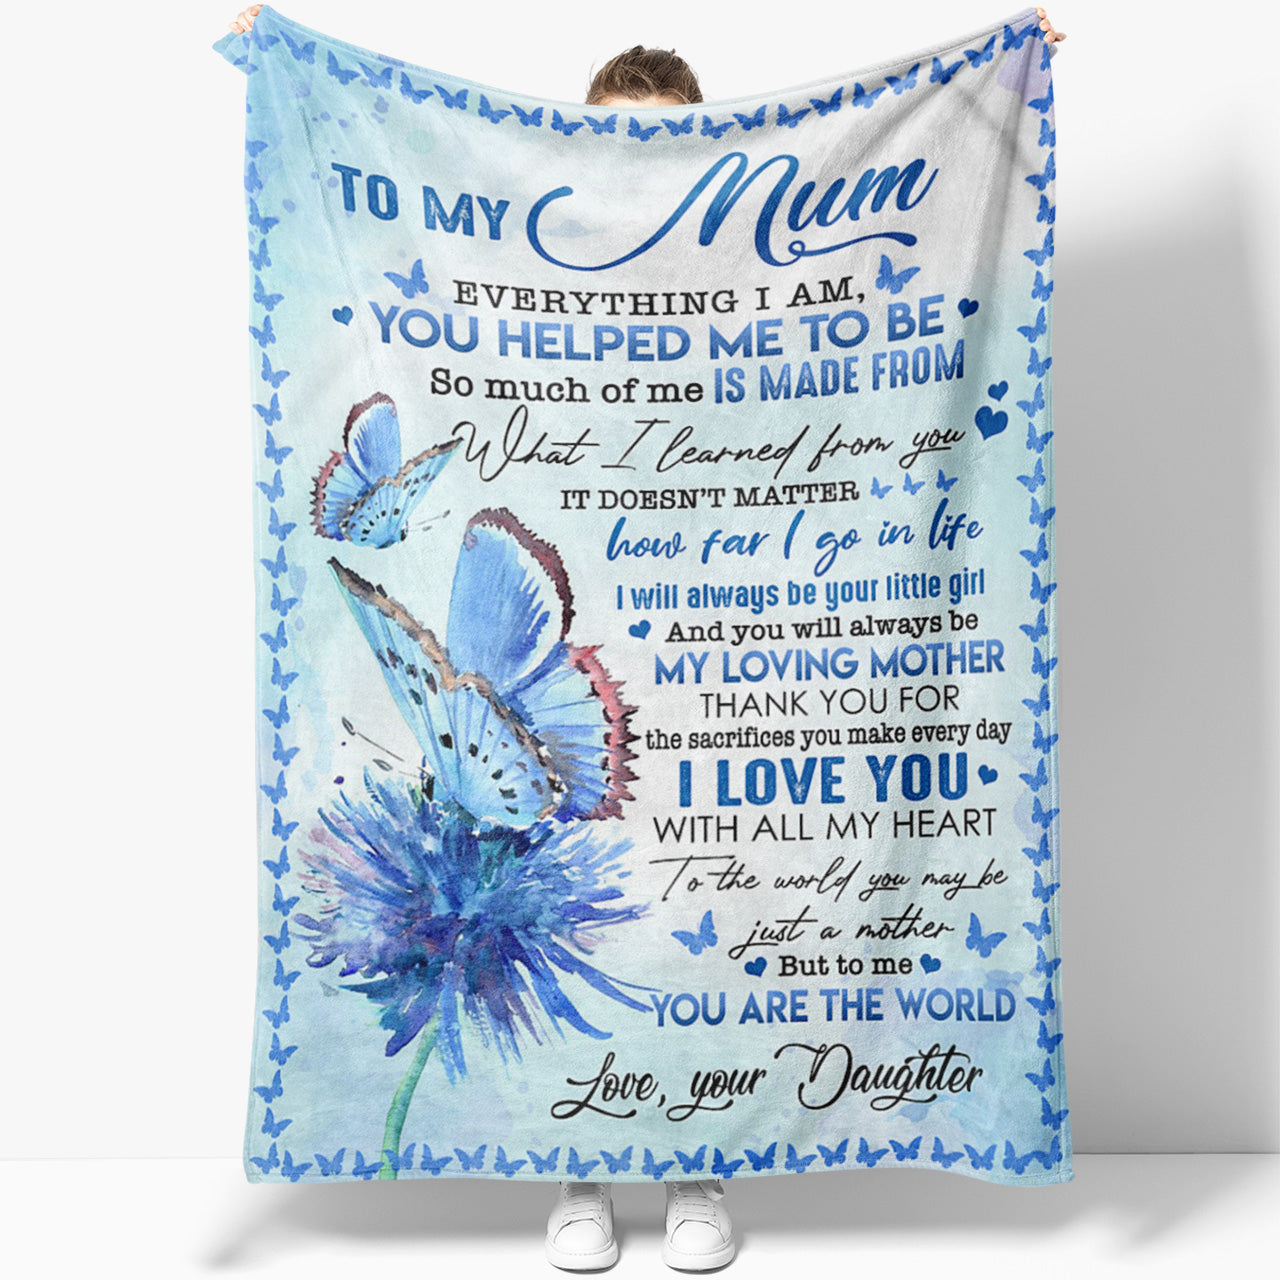 Blanket Gift ideas For Mom, Christmas Gifts For Mom, I Am, Mothers Day Gifts,  Personalized Mothers Day Gifts, Mother's Day Gifts For Wife, Mom's Day -  Sweet Family Gift